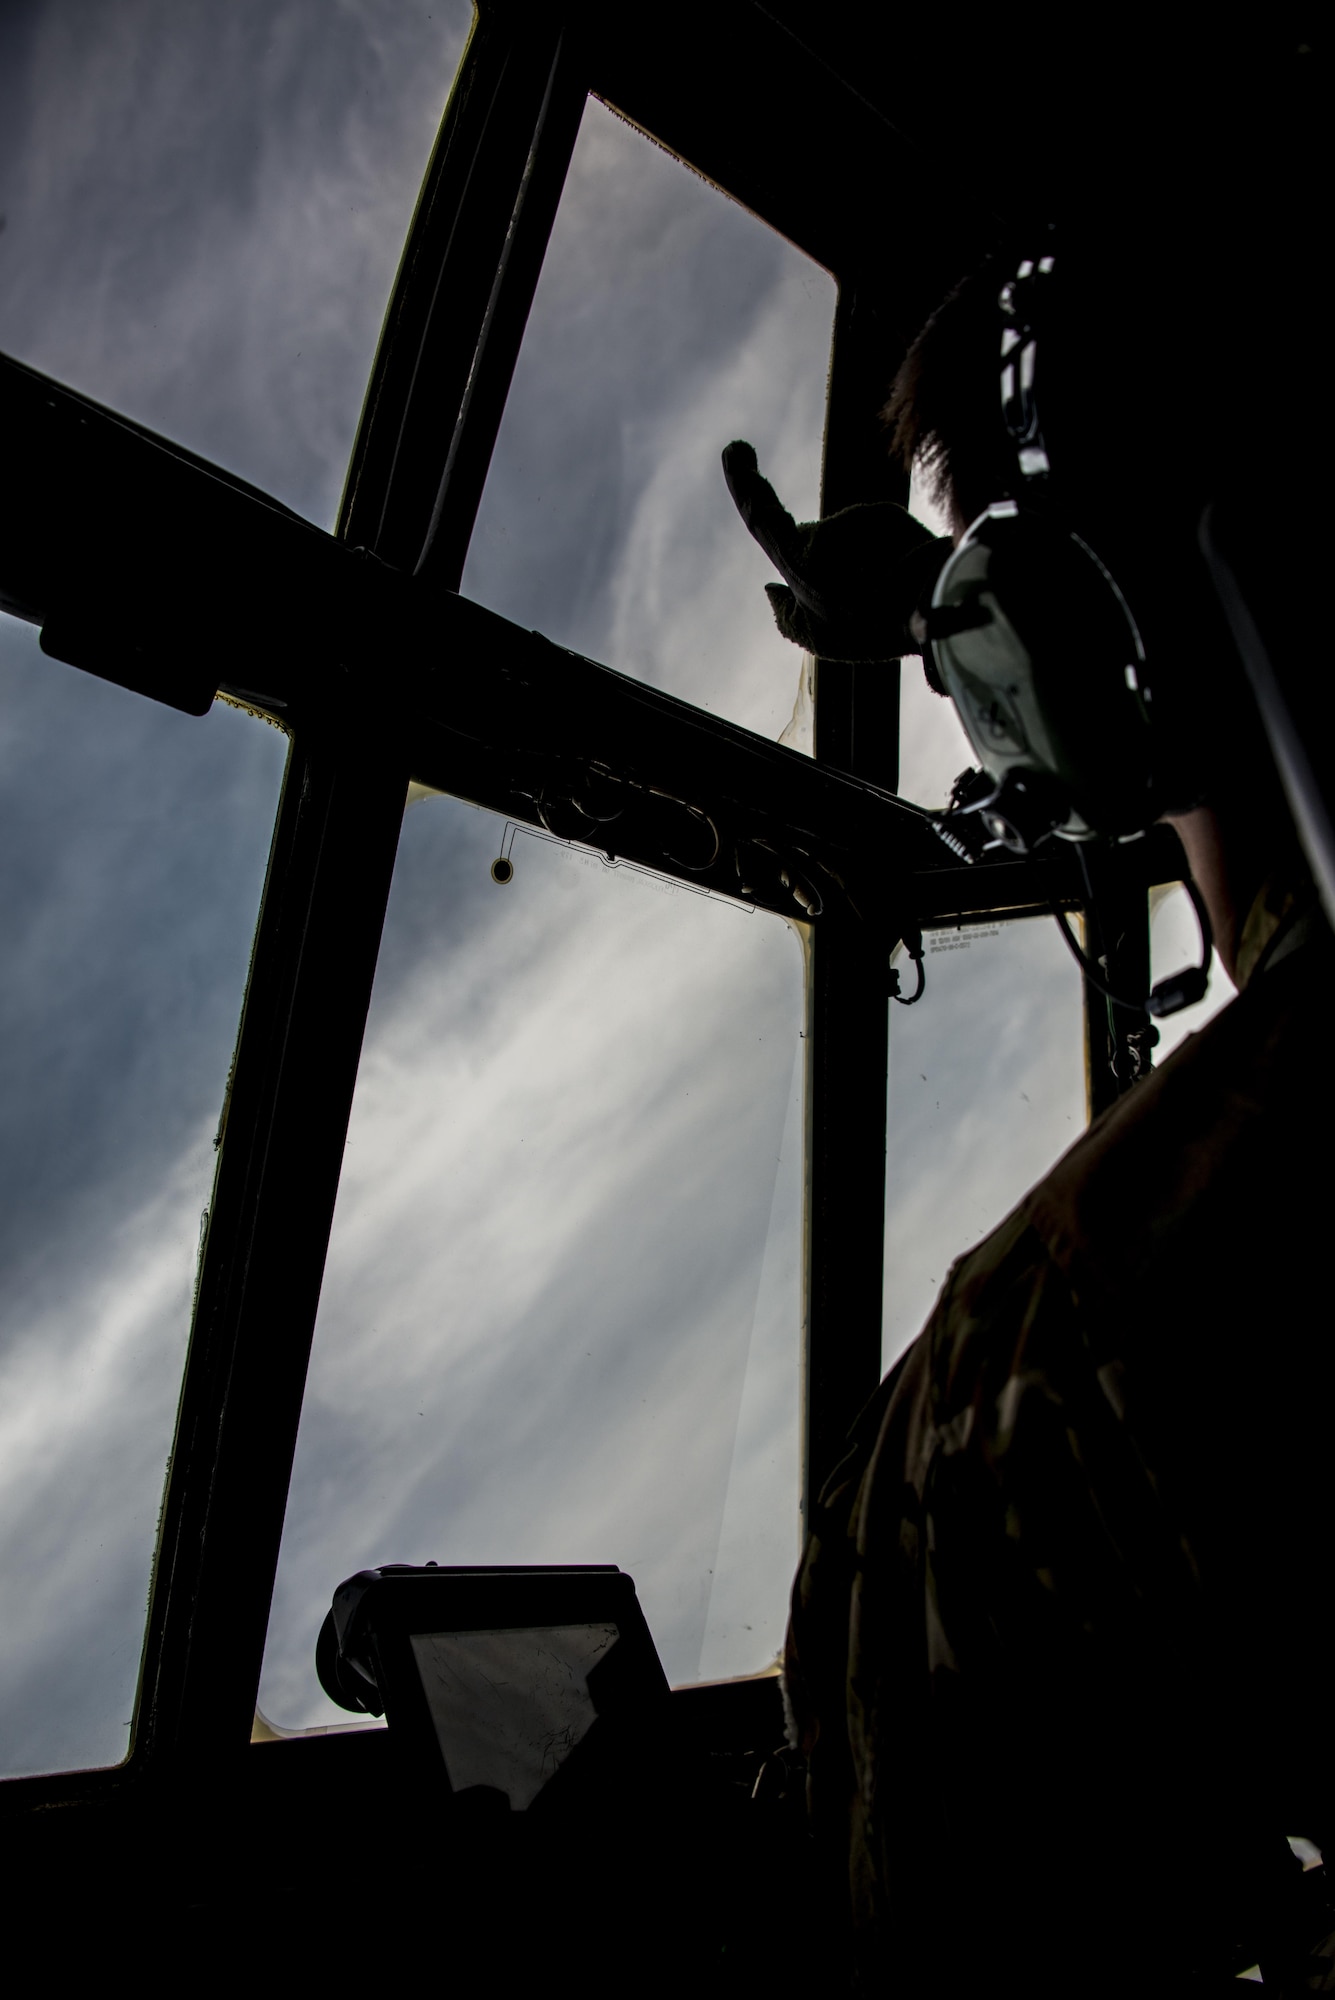 Capt. Andrew Bryant, 1st Special Operations Squadron aircraft commander, points out the window of an MC-130H Combat Talon II during low-level air intercept (AI) training with three F-16Cs from the 35th Fighter Squadron at Kunsan Air Base, Oct. 19, 2016. This opportunity provided the 1st SOS and 35th FS crews with invaluable AI training. (U.S. Air Force photo by Capt. Jessica Tait)